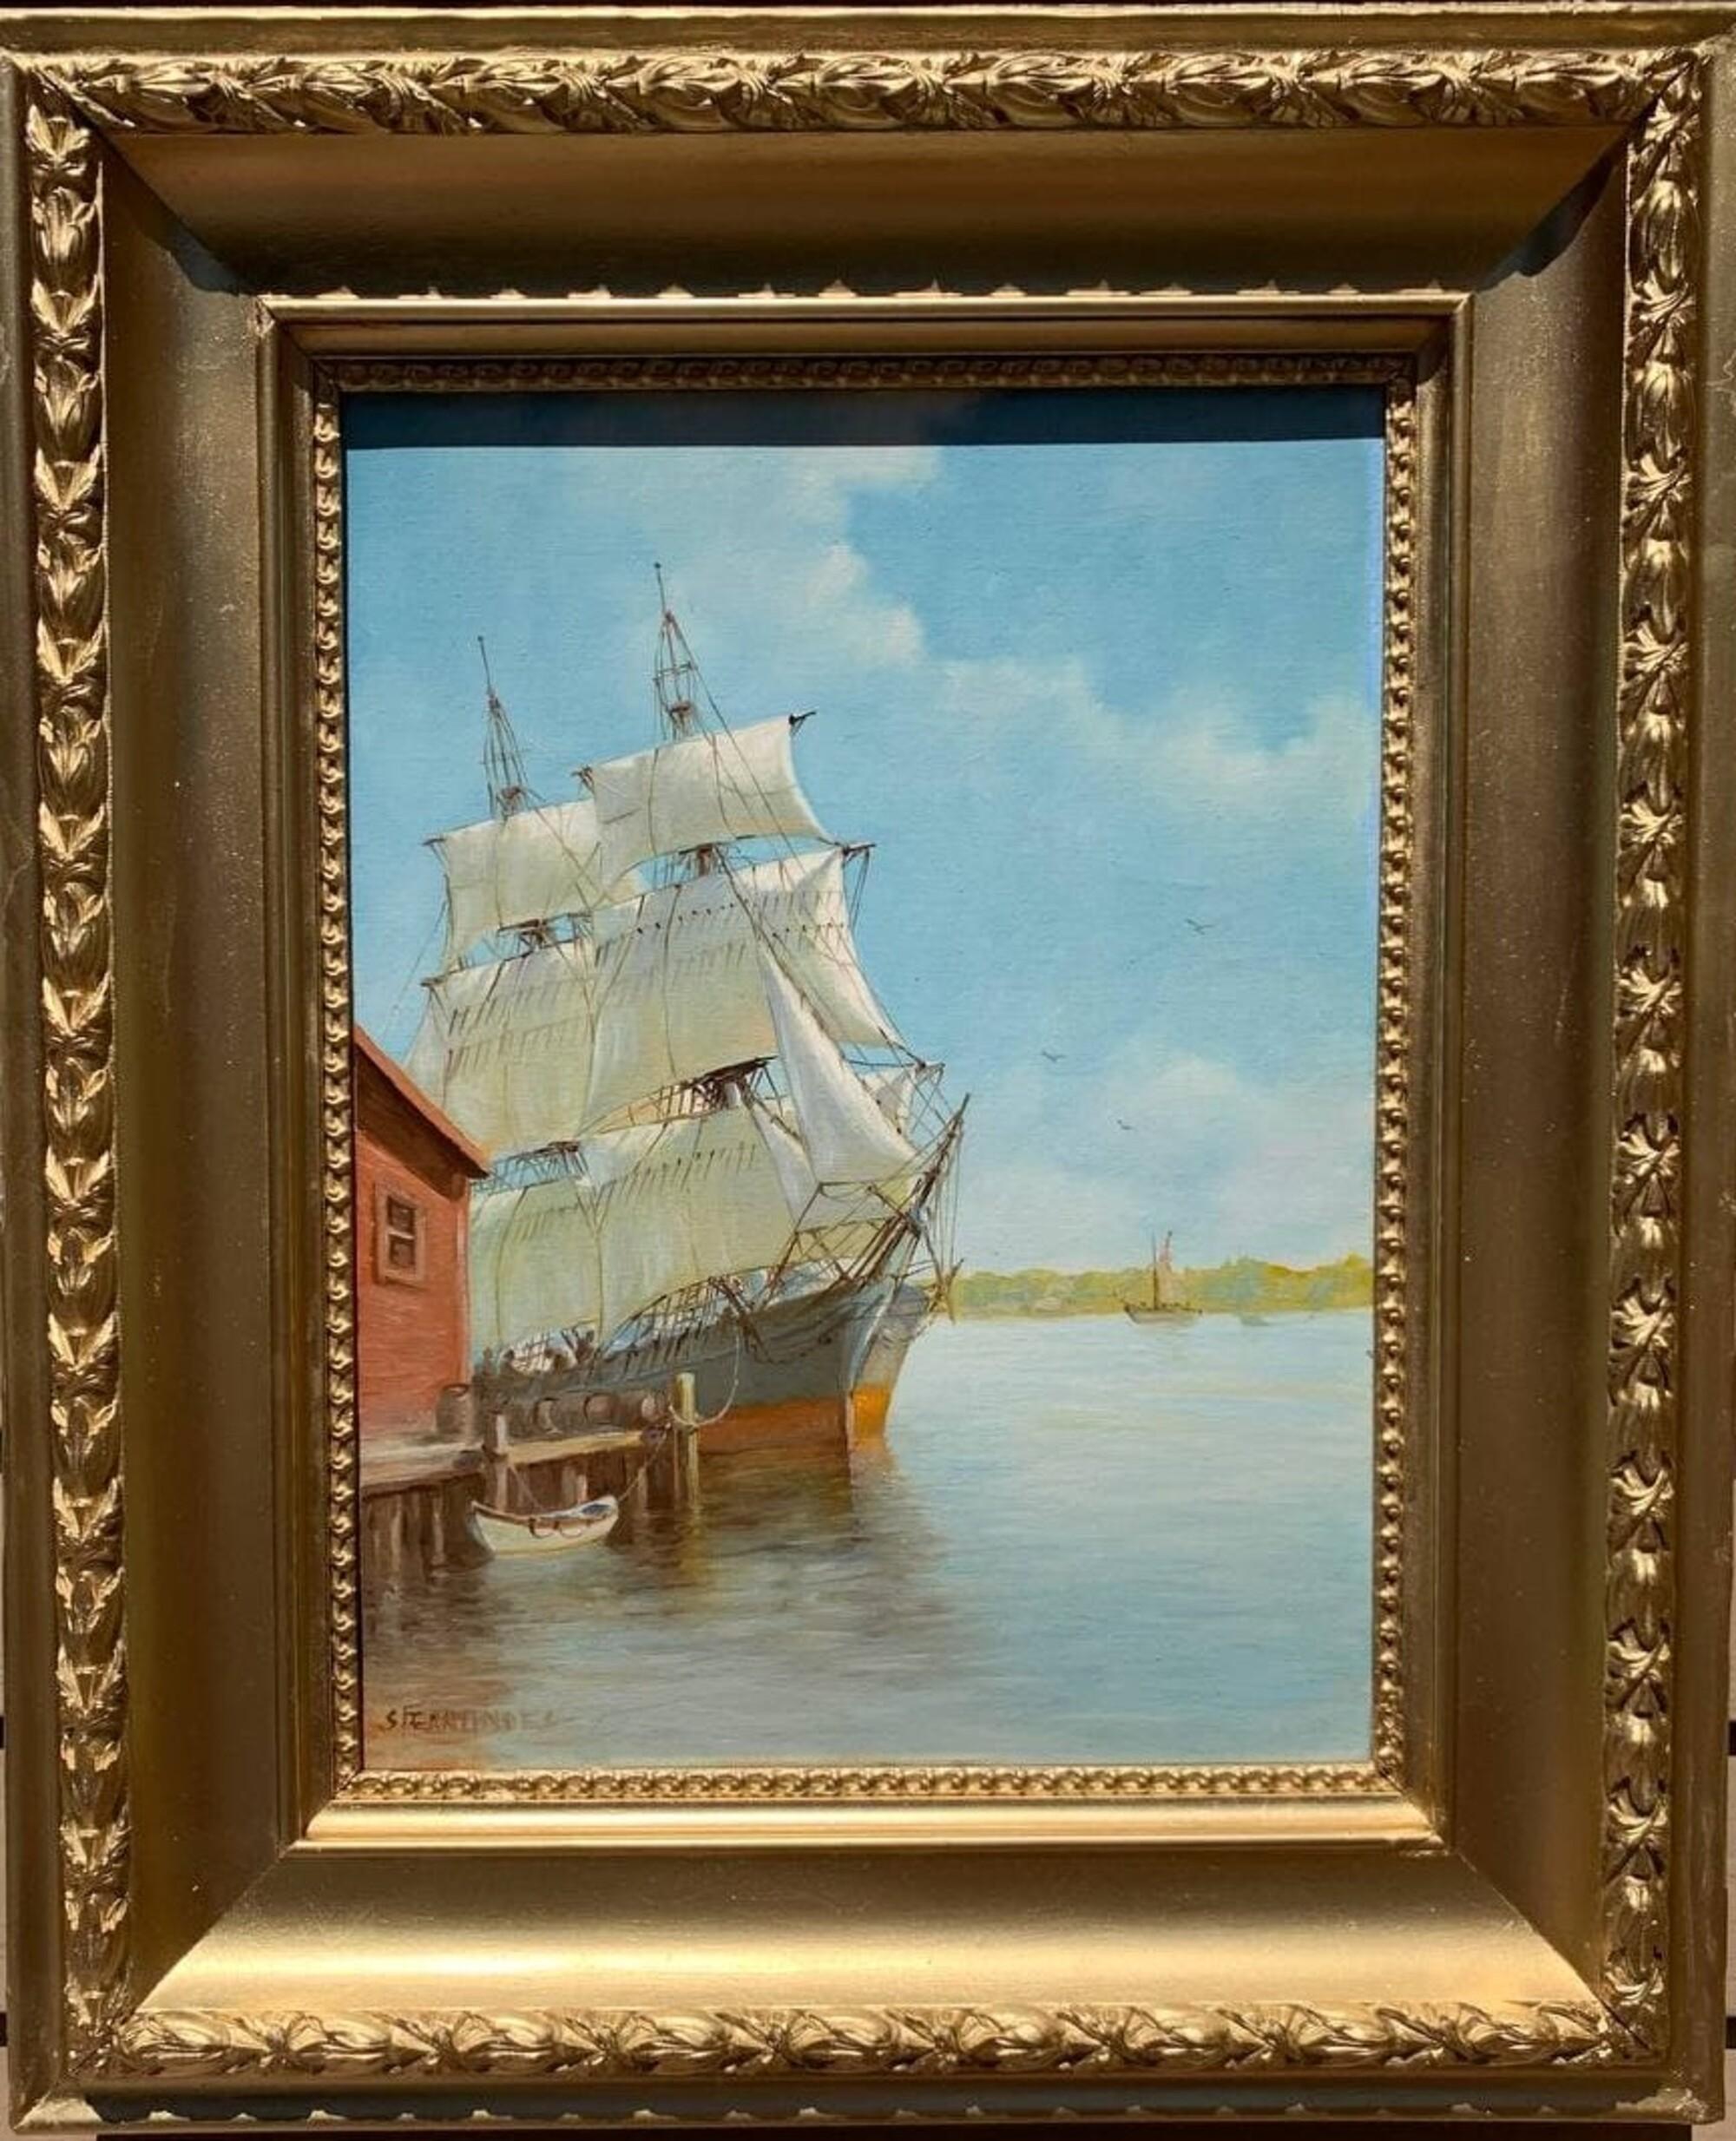 This is an amazing original oil painting on canvas of the famous Brazilian-American painter, Humberto da Silva Fernandes (1937-2005) depicting a Ship at the pier, a Harbor dock scene, seascape.

Humberto da Silva Fernandes (1937-2005) was a